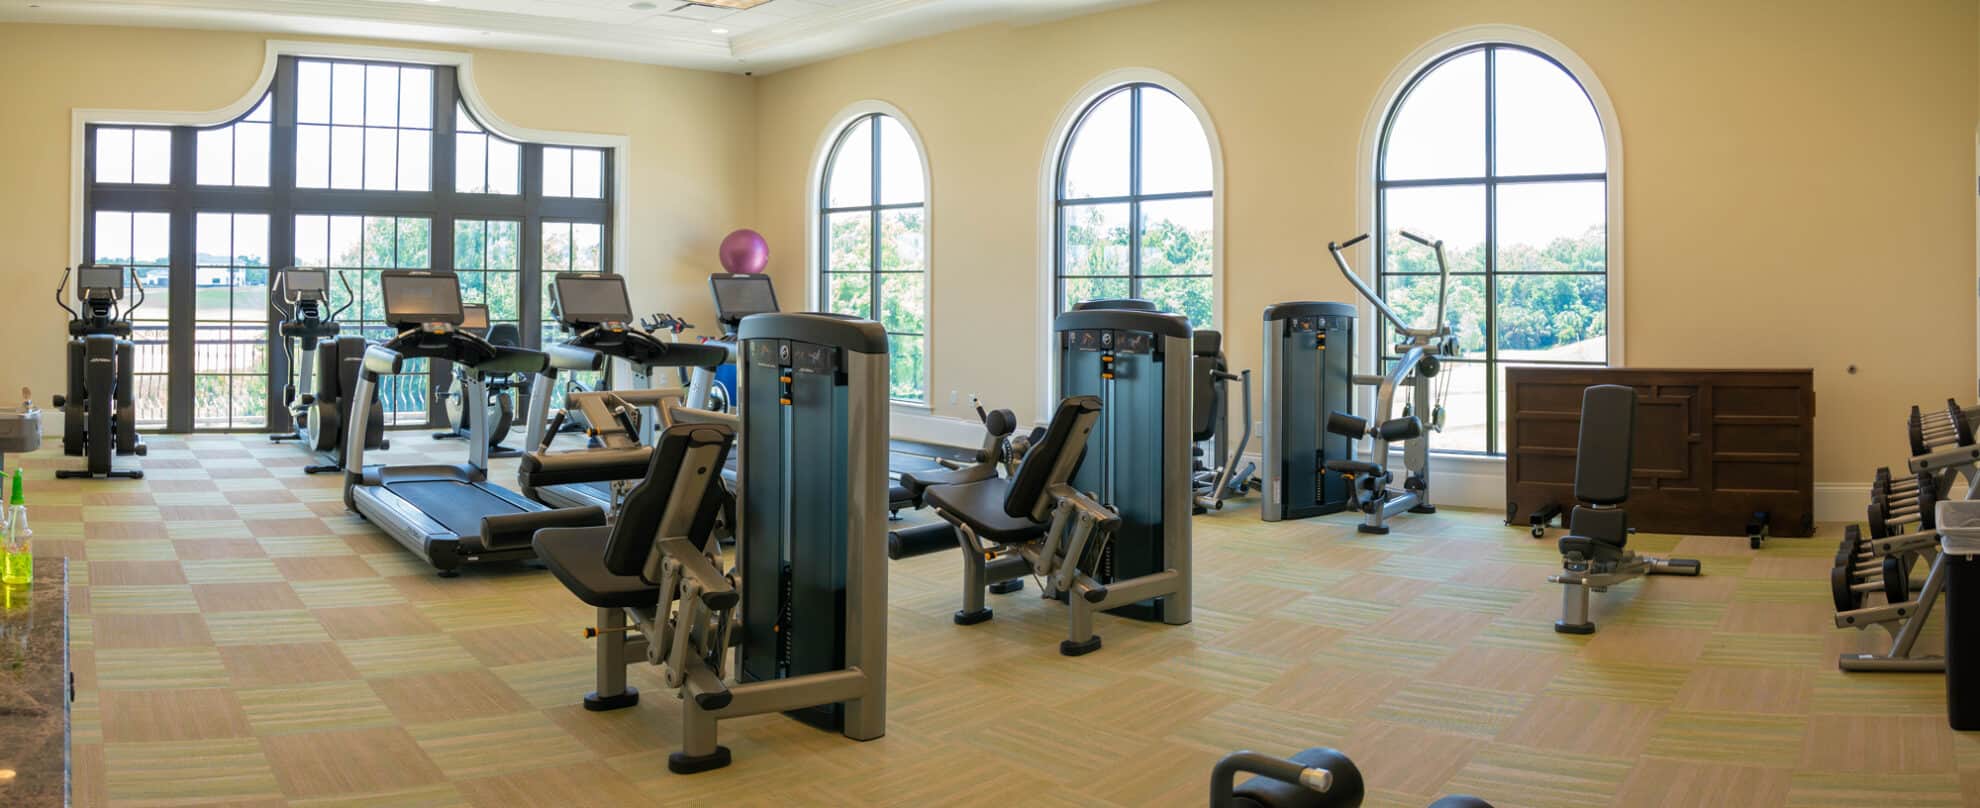 Fitness room at the Bear’s Den Resort Orlando’s Nicklaus Clubhouse.